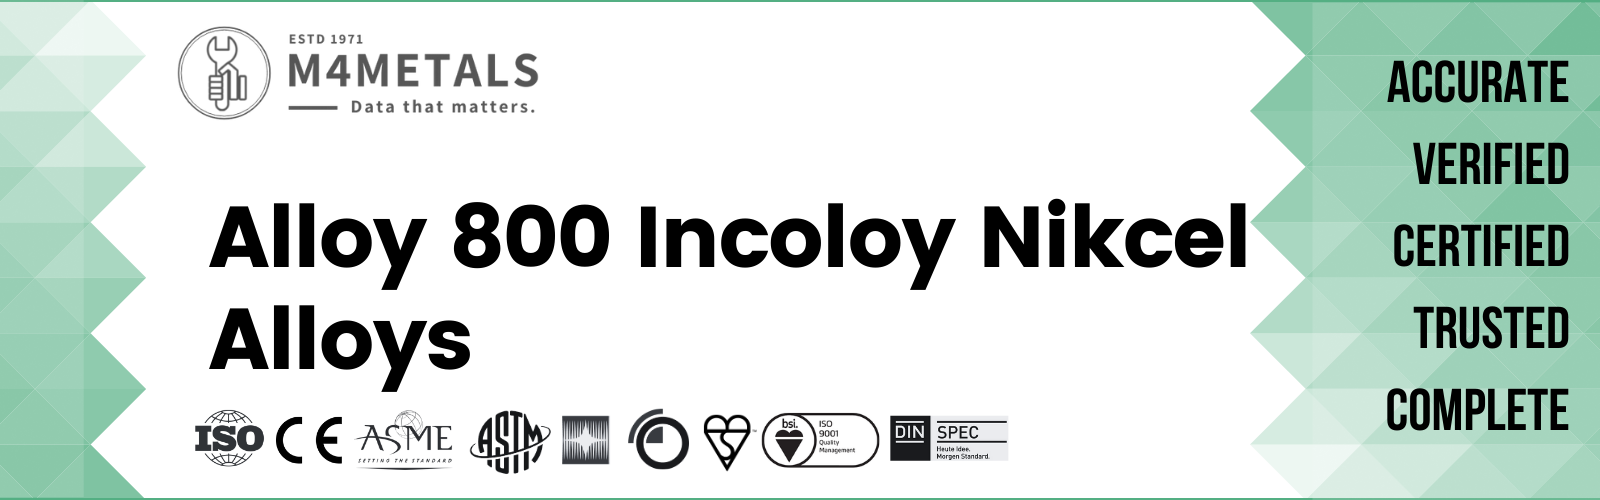 Incoloy Alloy 800